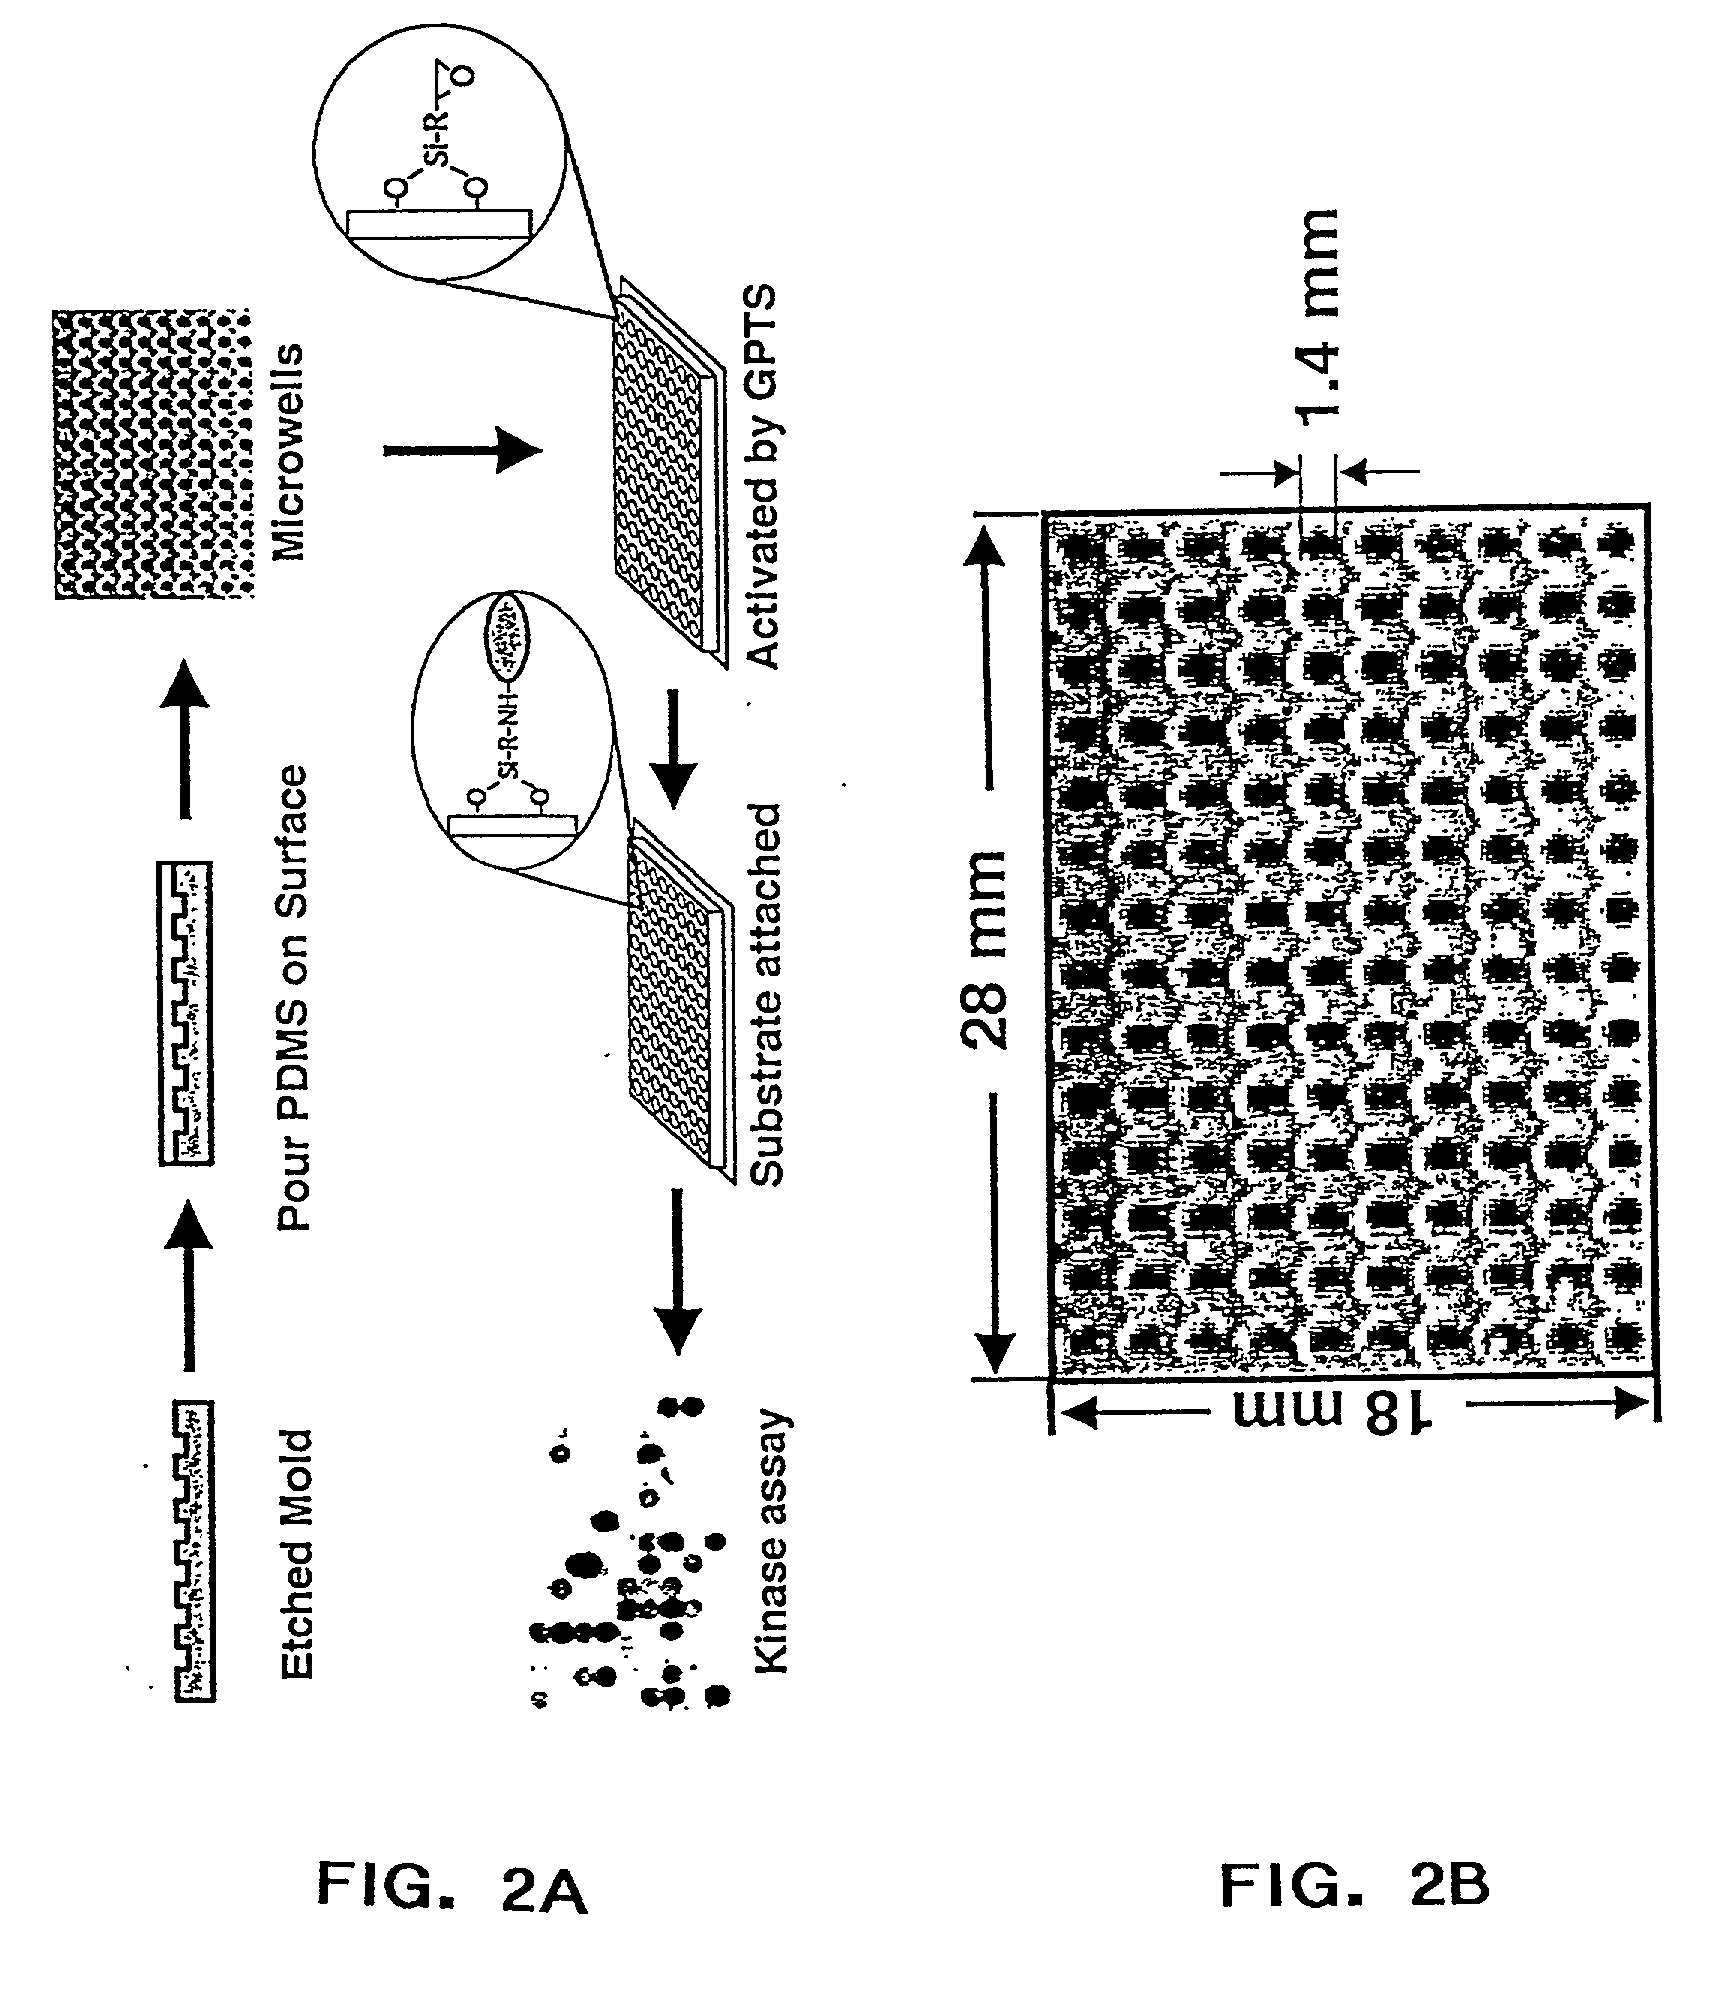 Protein chips for high throughput screening of protein activity